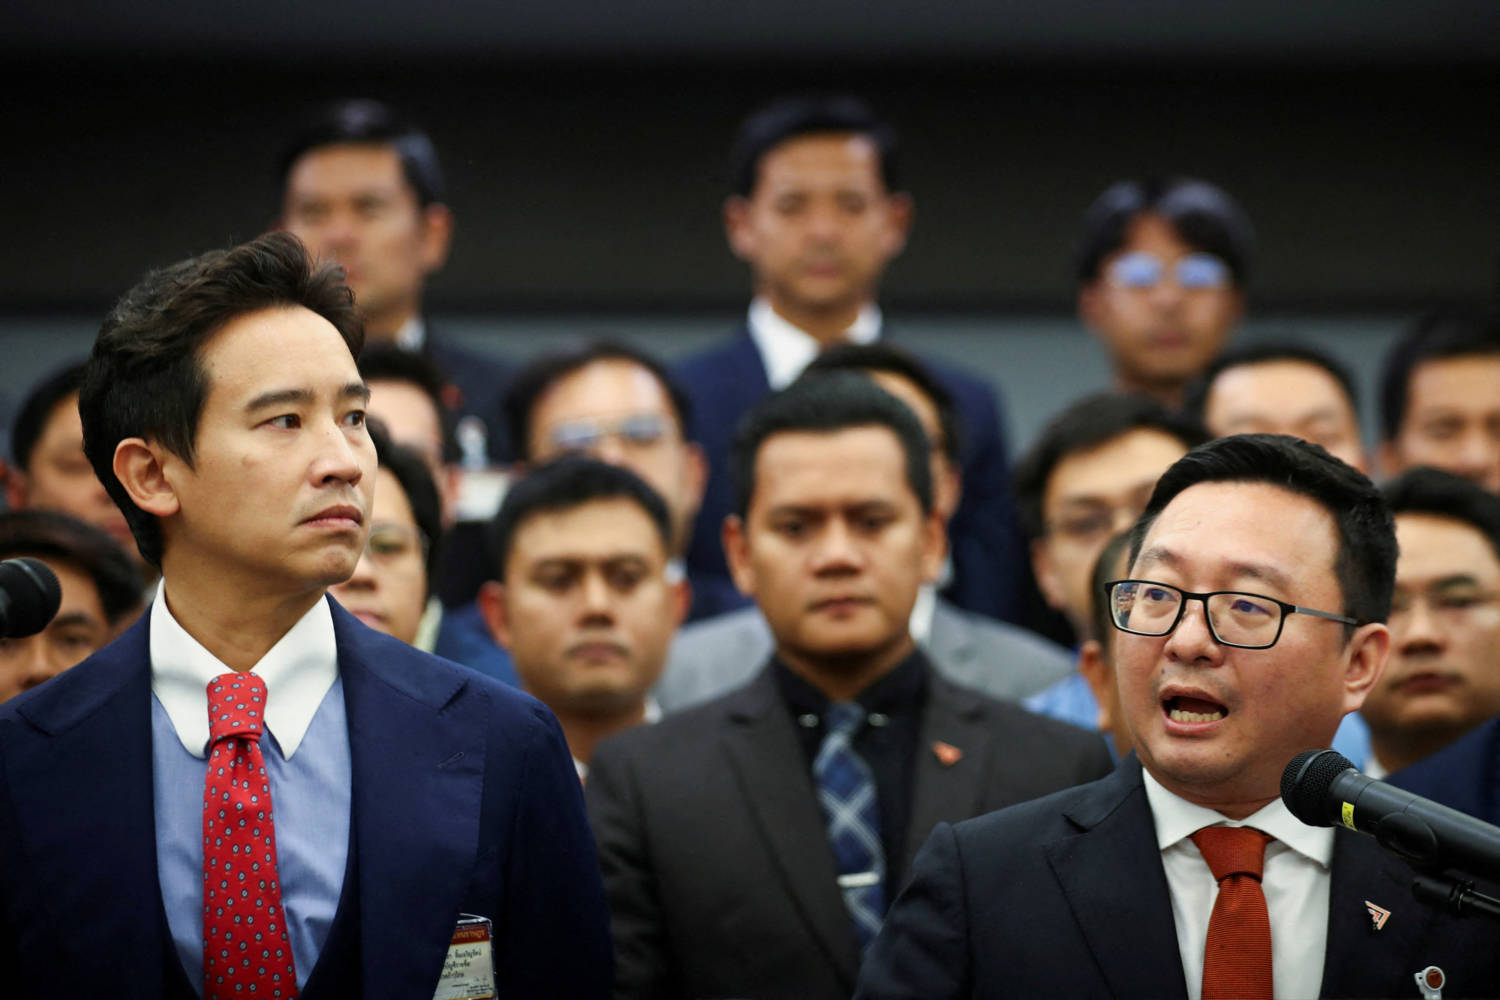 File Photo: Former Move Forward Party Leader Limjaroenrat And Move Forward Party Leader Tulathon React During A Presser After Thailand's Constitutional Court Delivered Its Verdict On The Election Winner's Bid To Amend A Law Against Insulting The Monarchy,